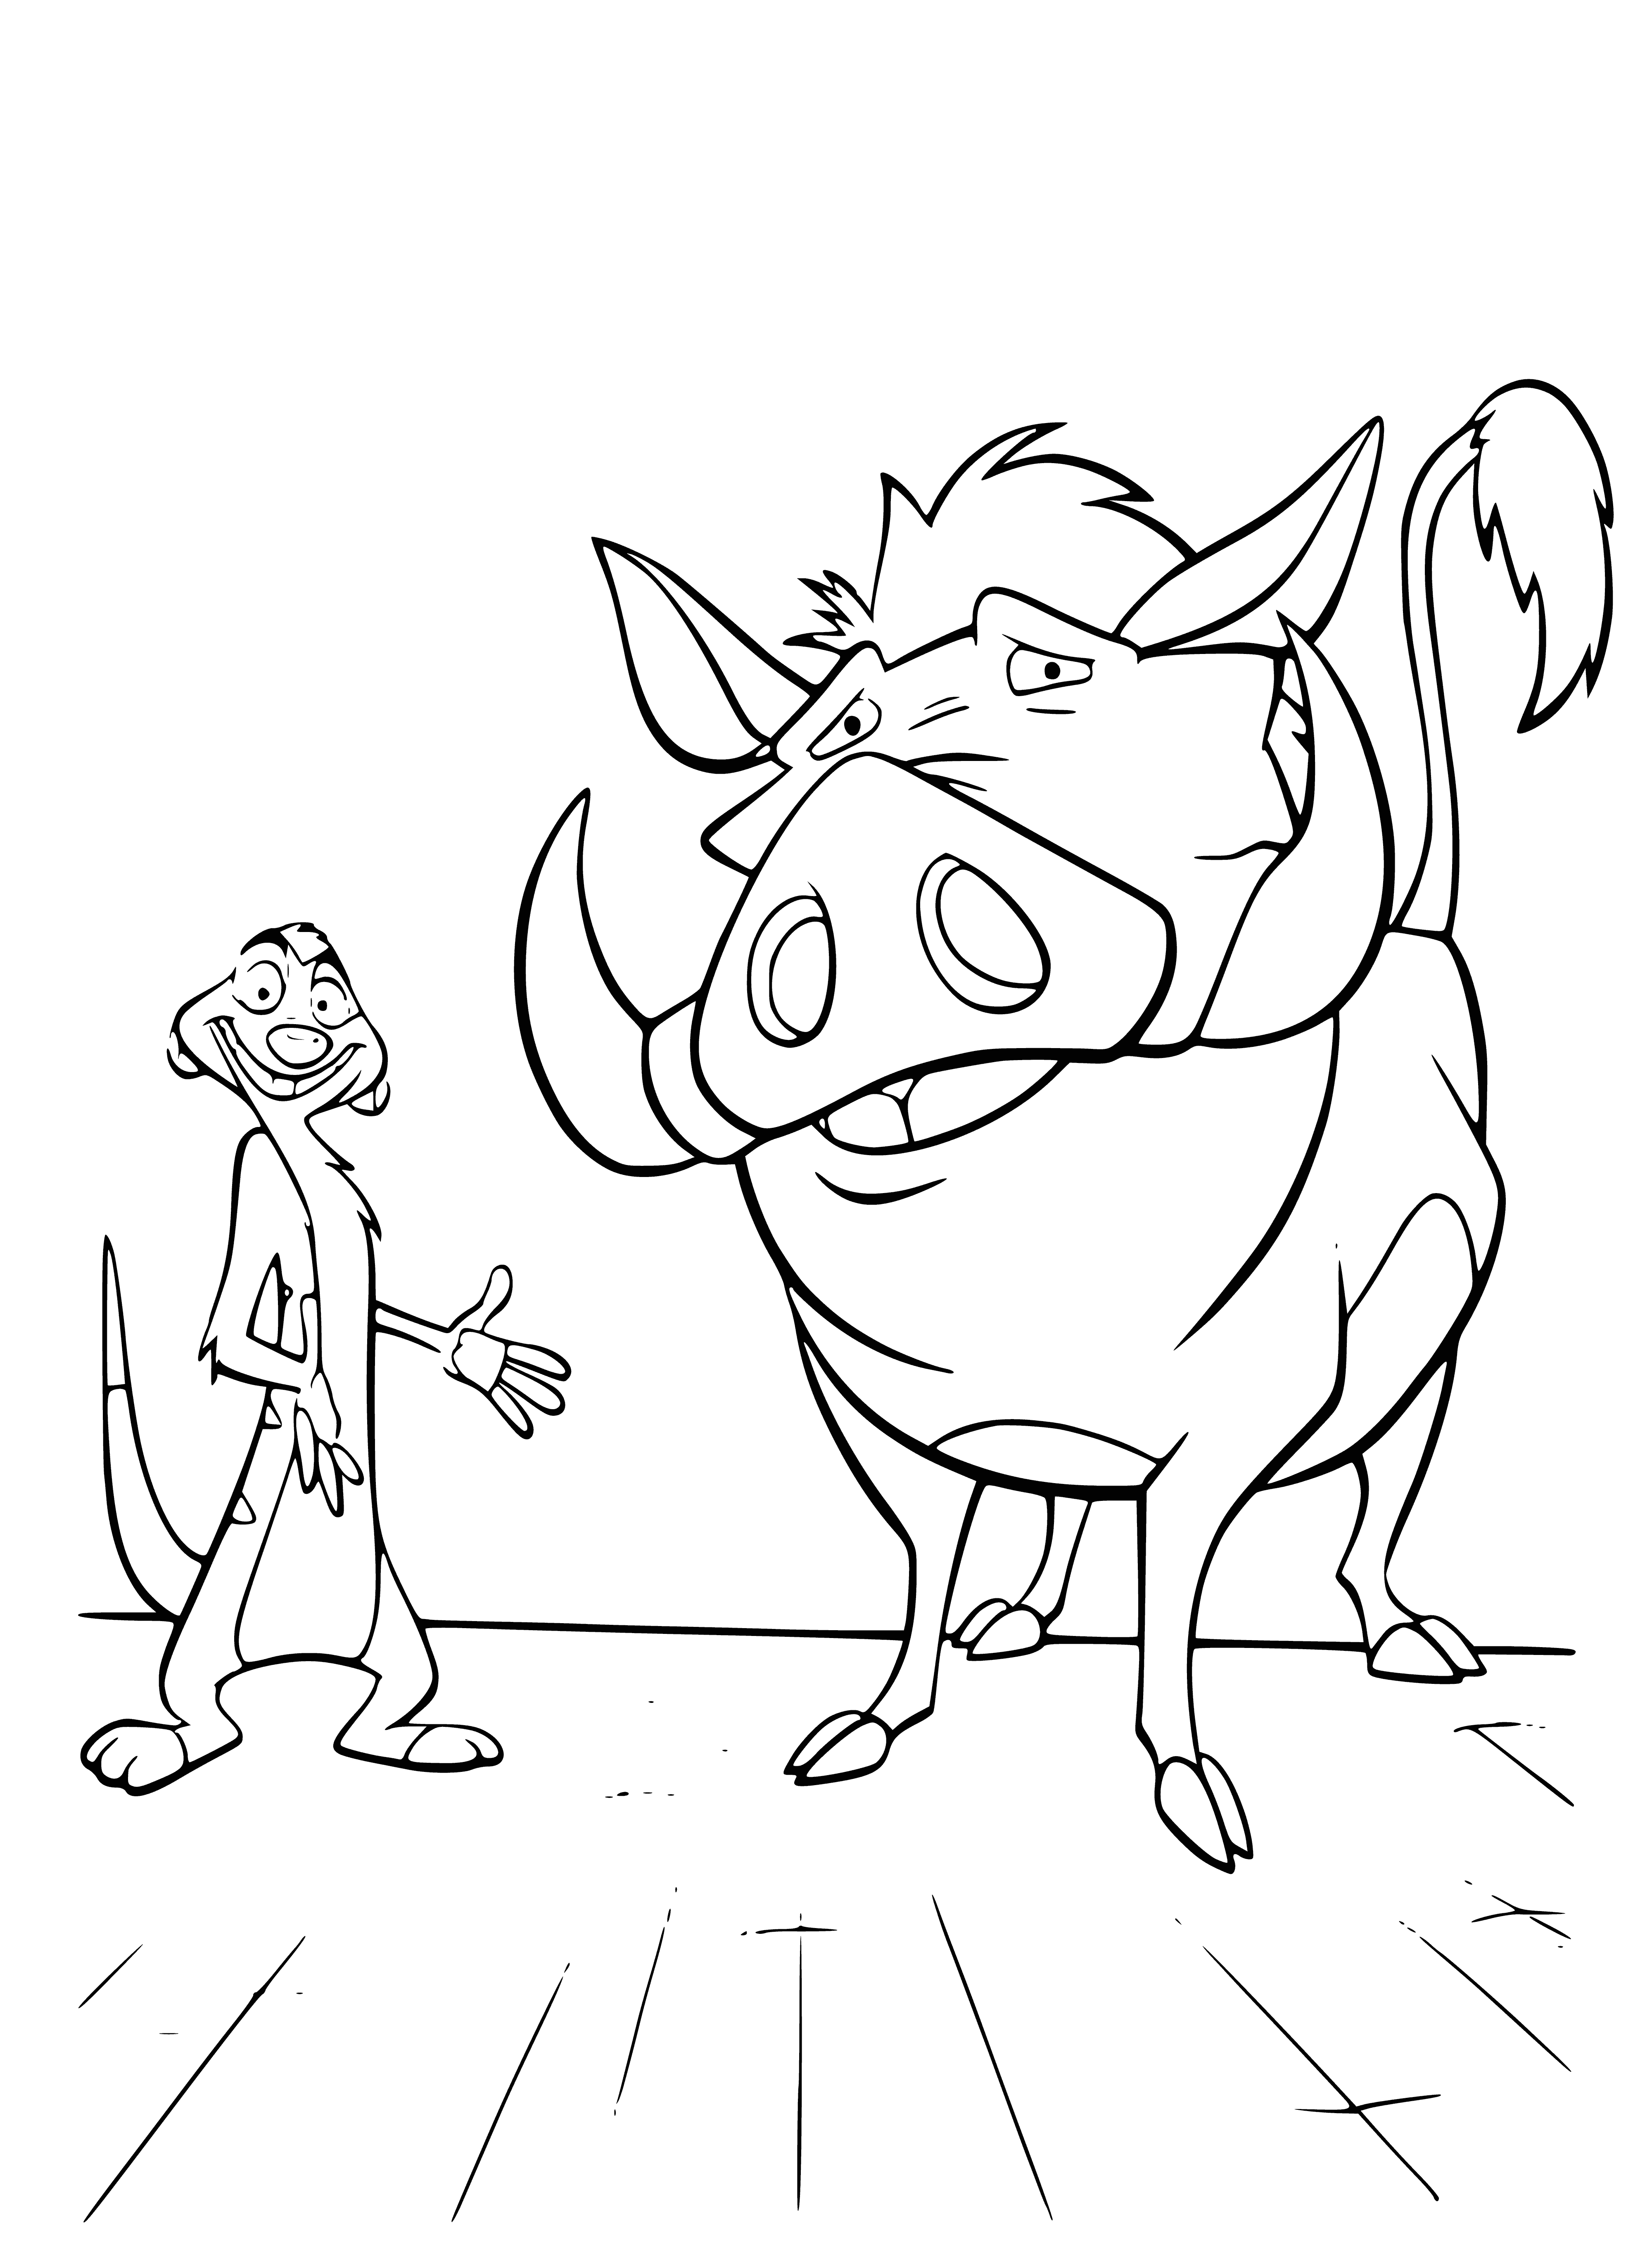 Timon and Pumbaa coloring page